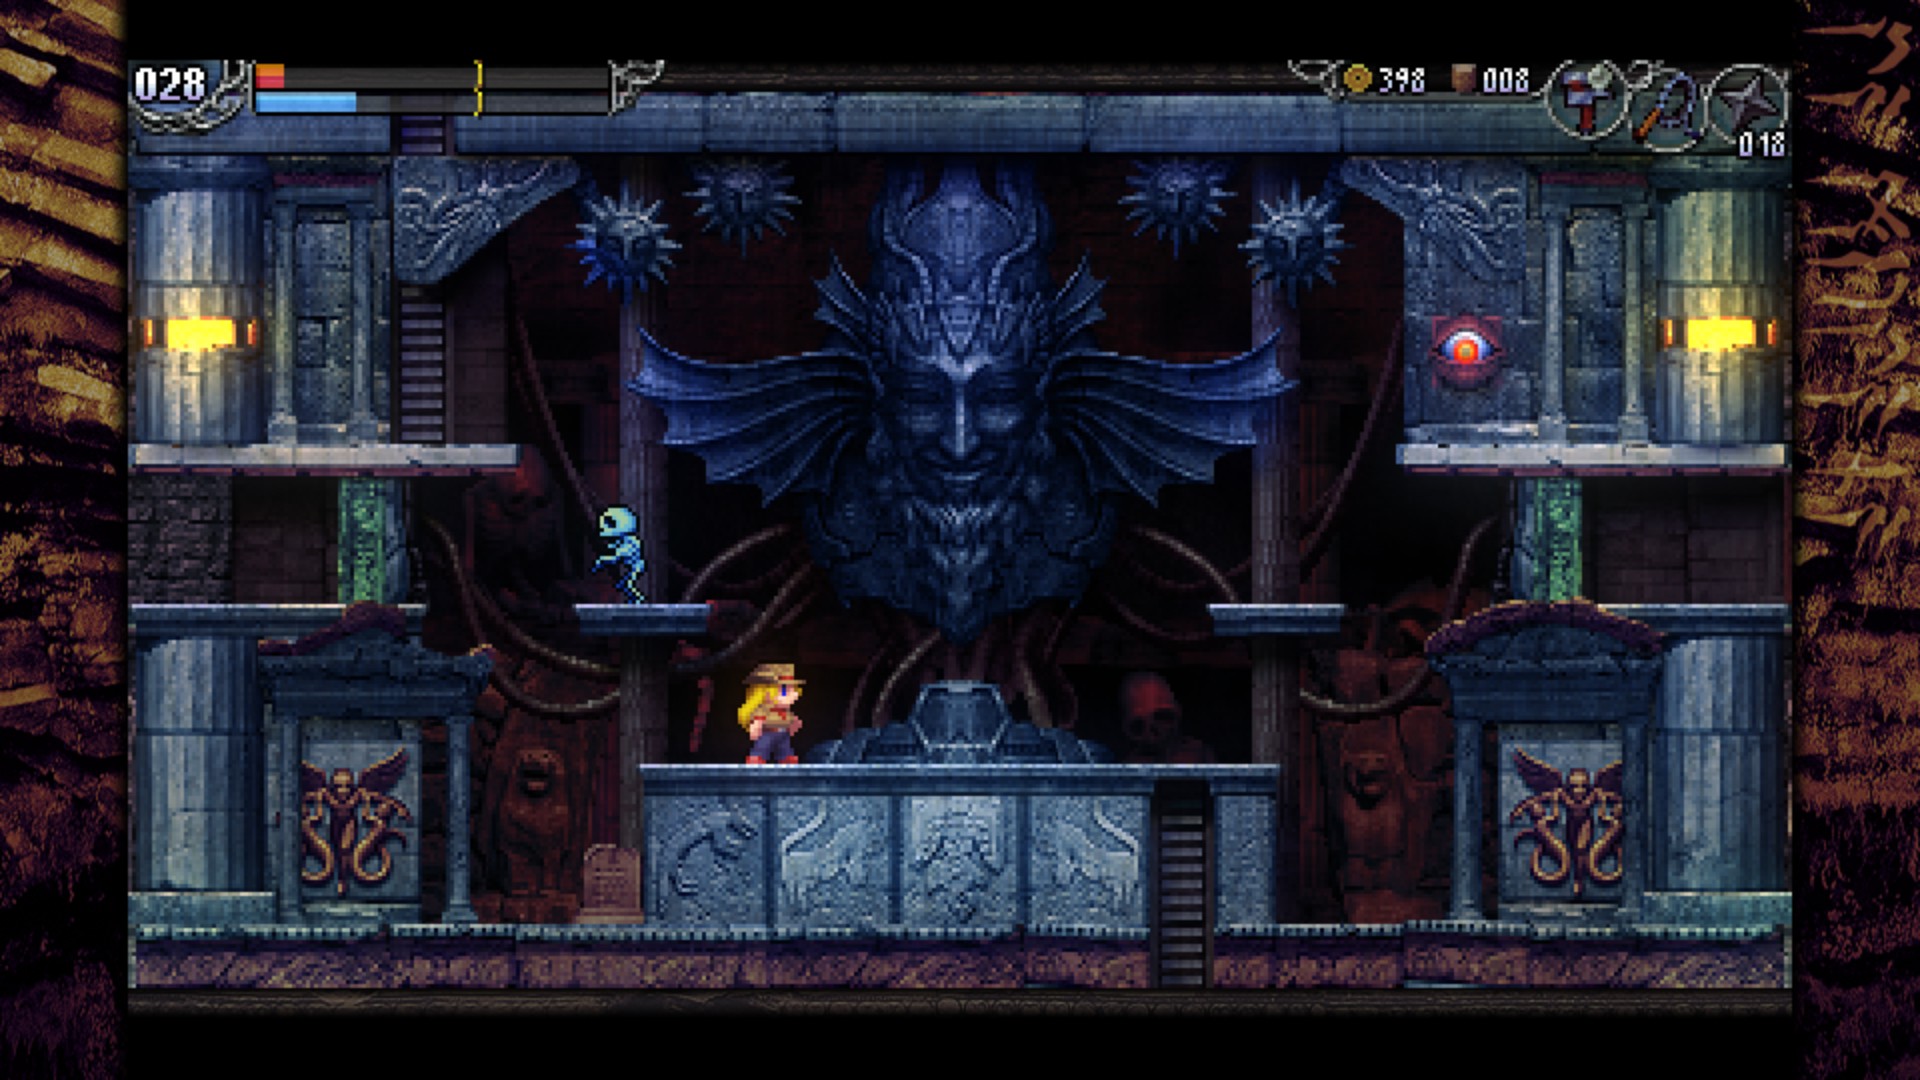 Physical Version Confirmed for La-Mulana 2 Console Ports